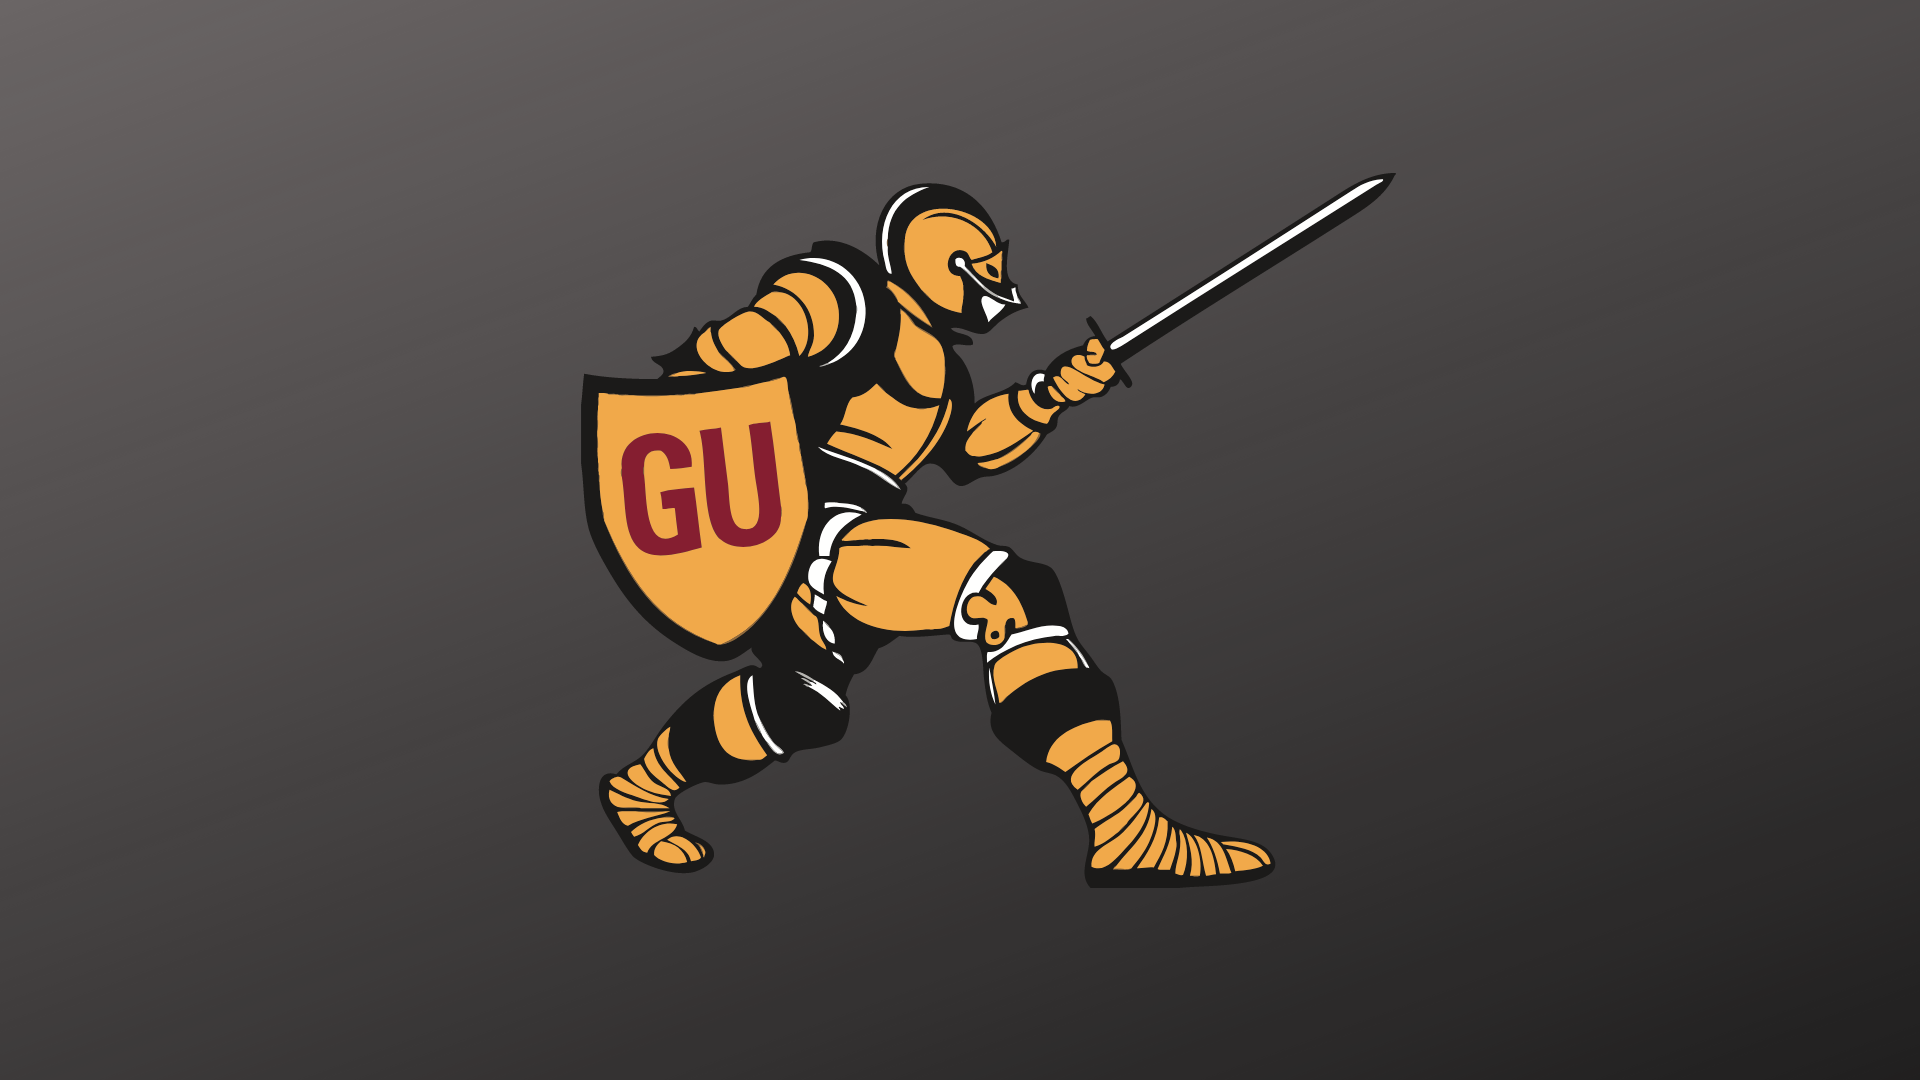 Gannon University Welcomes JC Hawkins as Assistant Basketball Coach